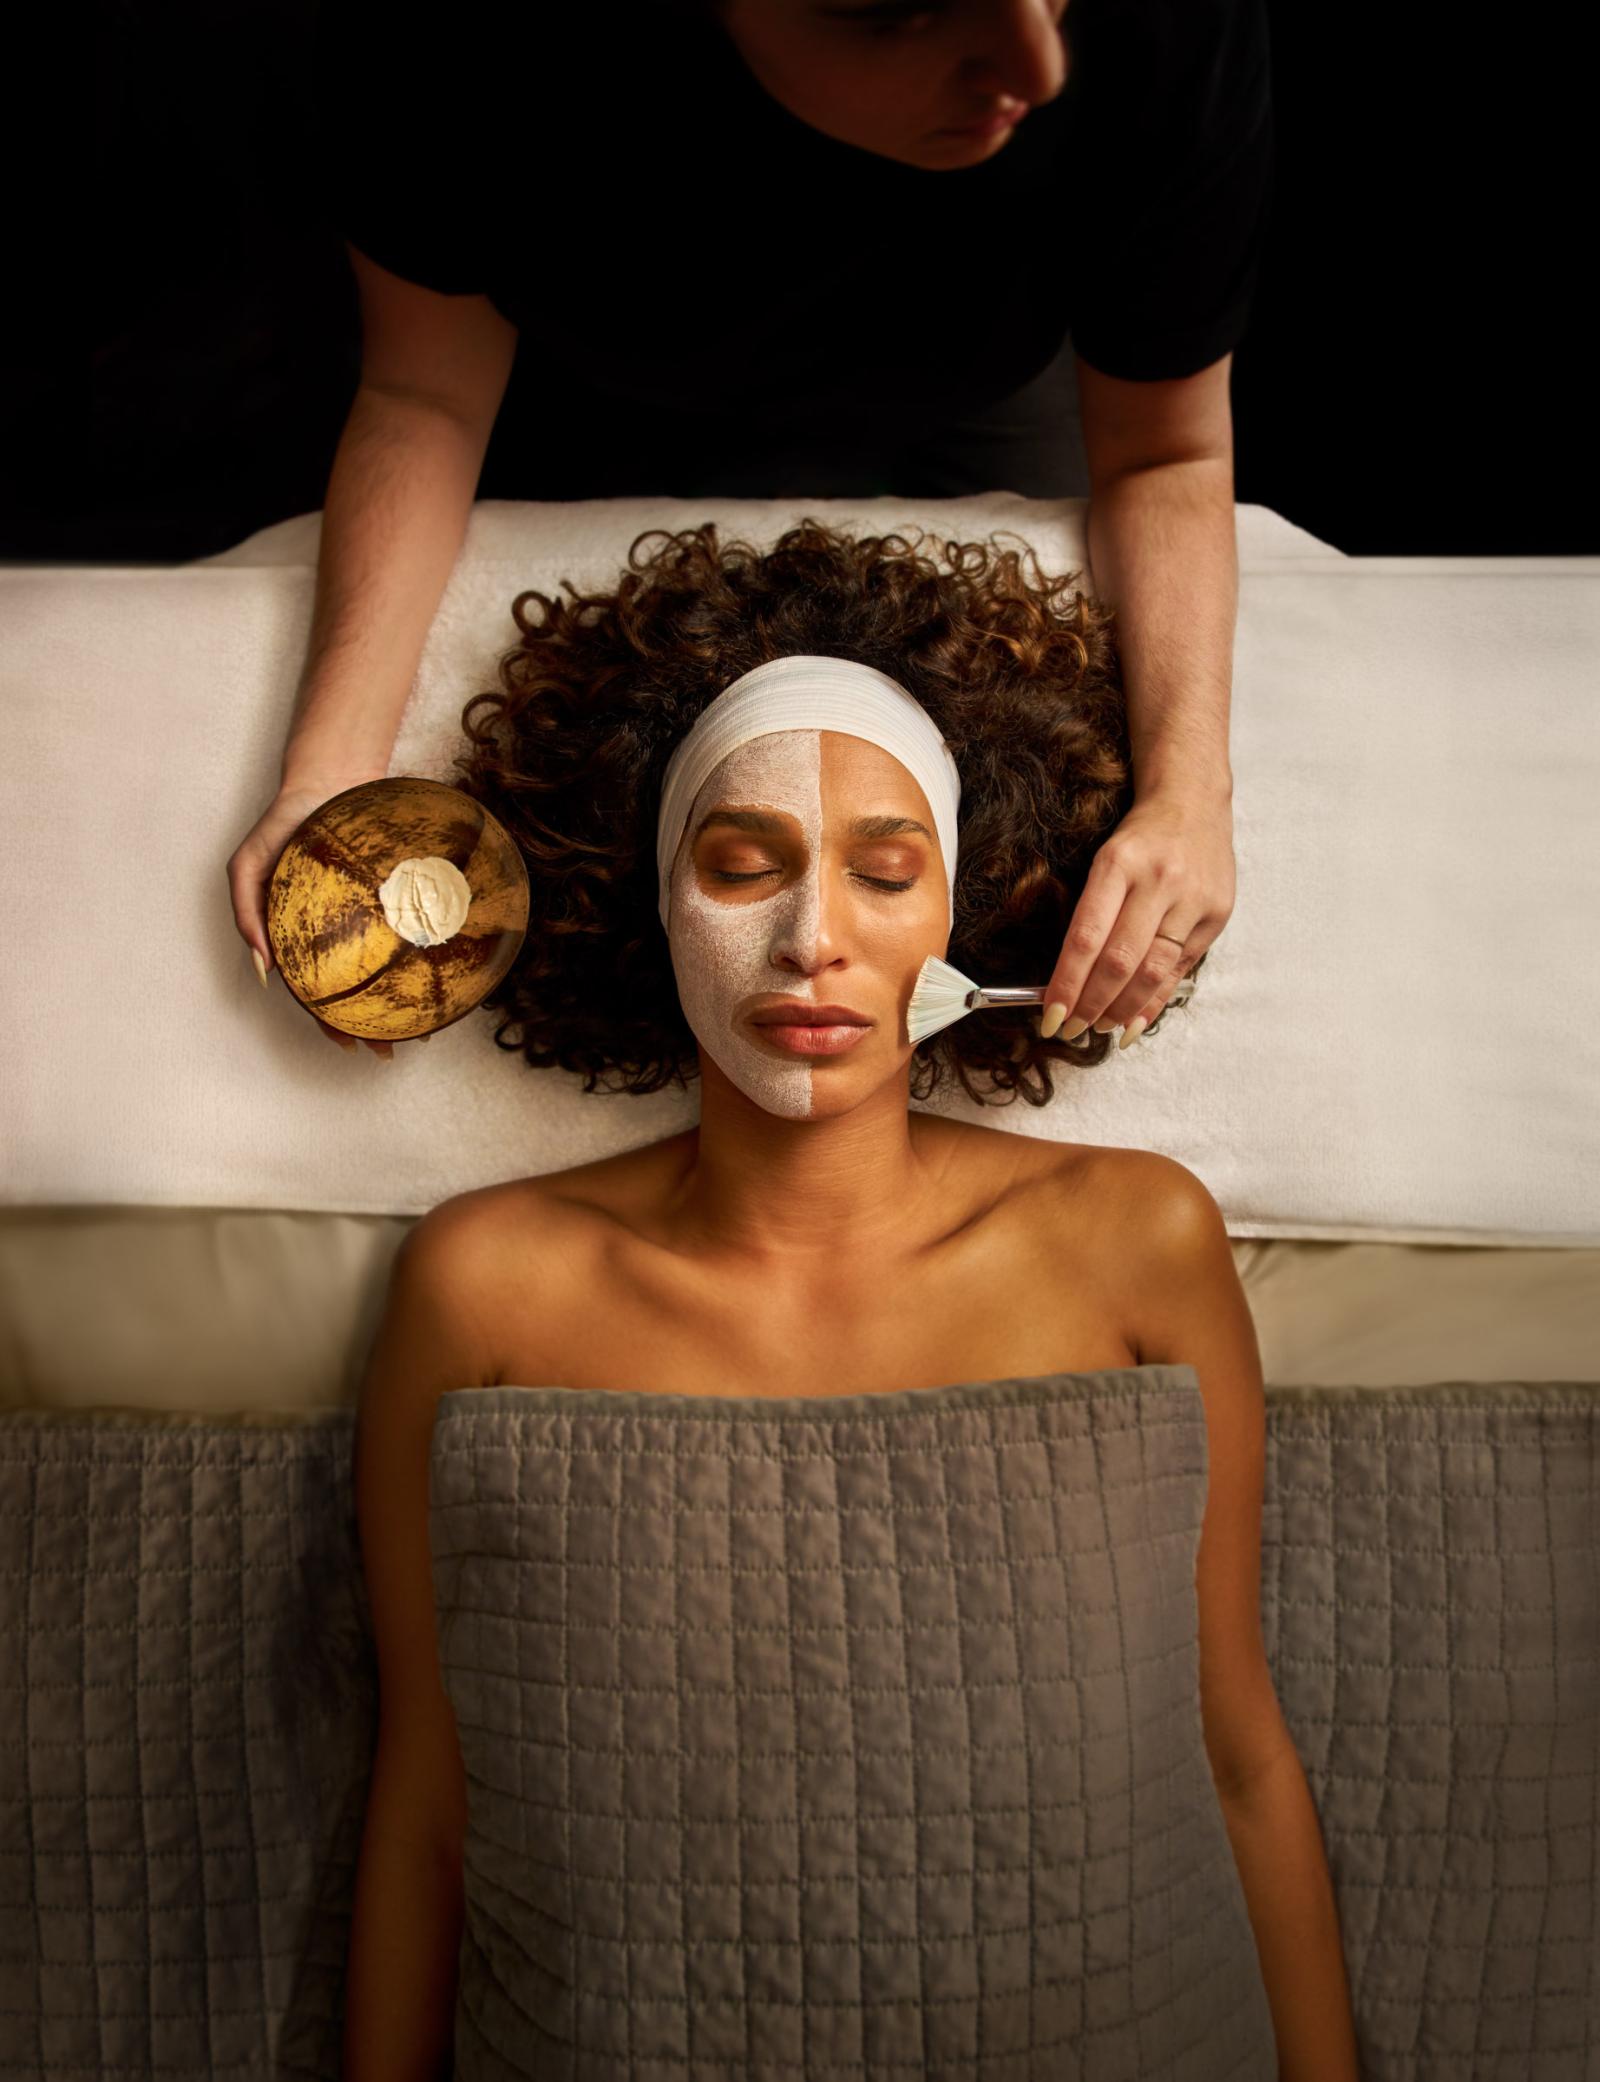 Woman relaxing while having a face mask painted on